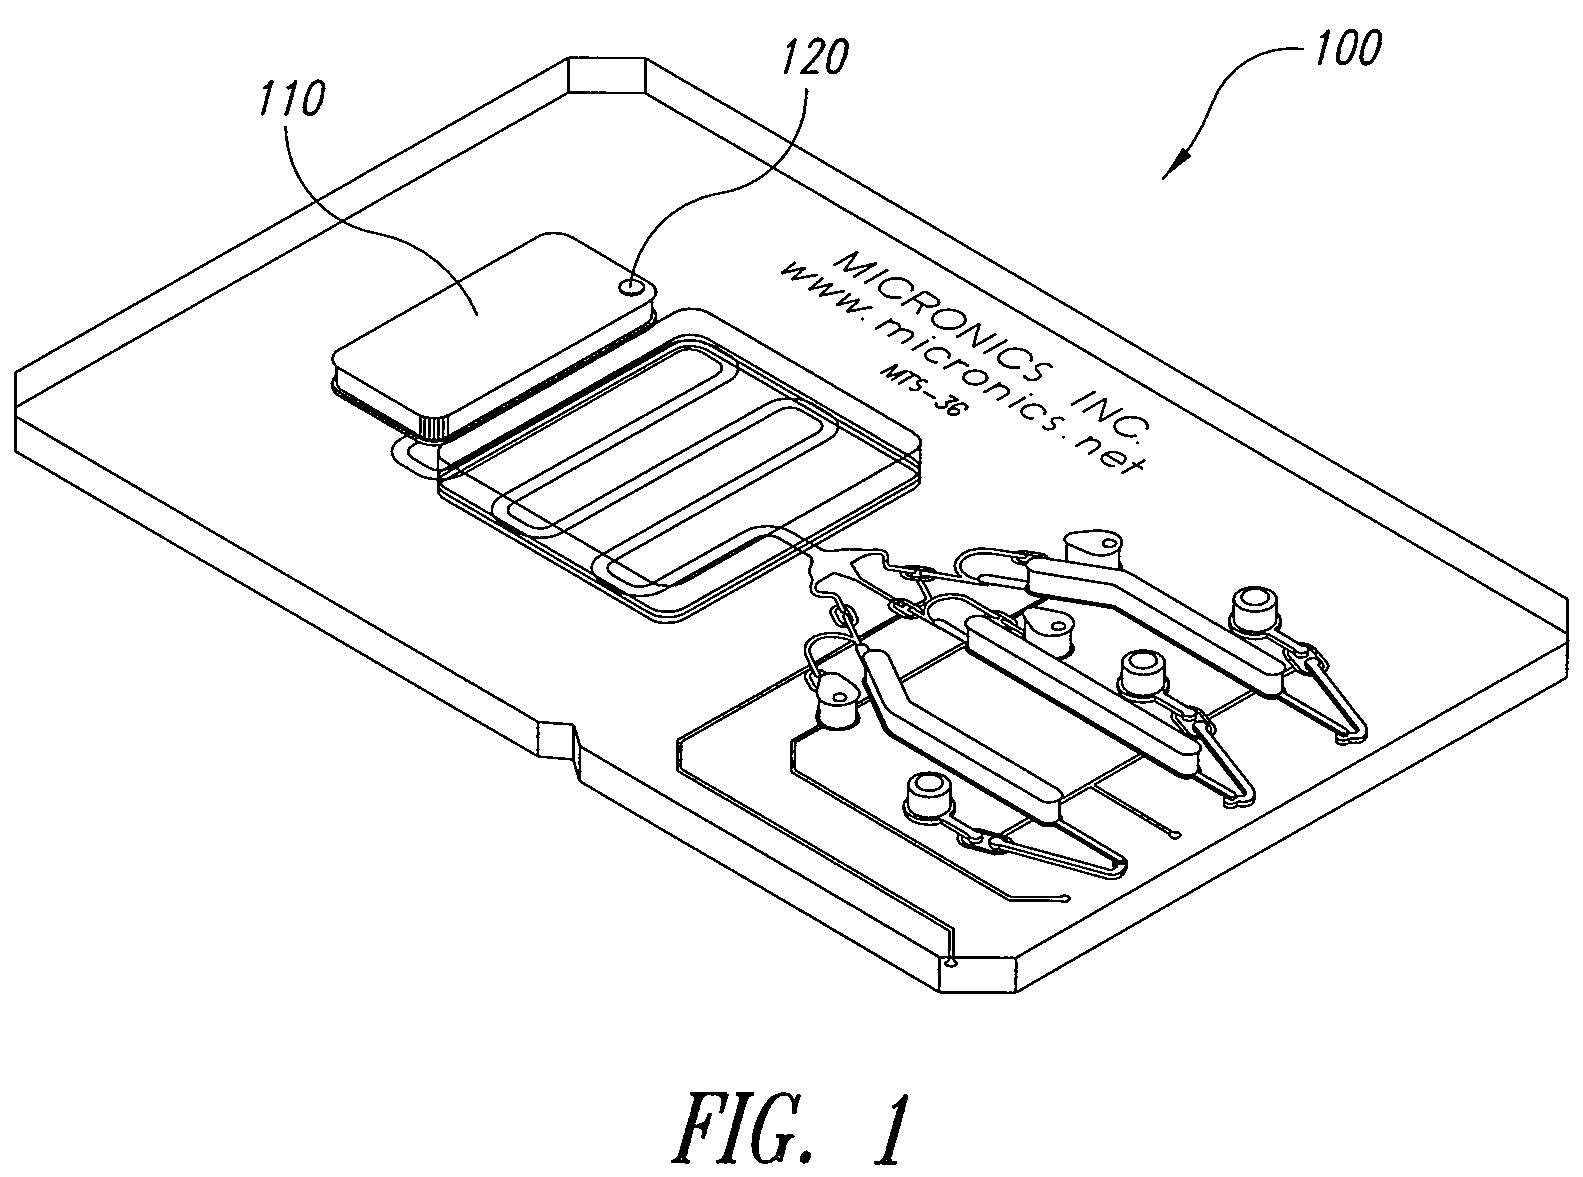 System and method for heating, cooling and heat cycling on microfluidic device